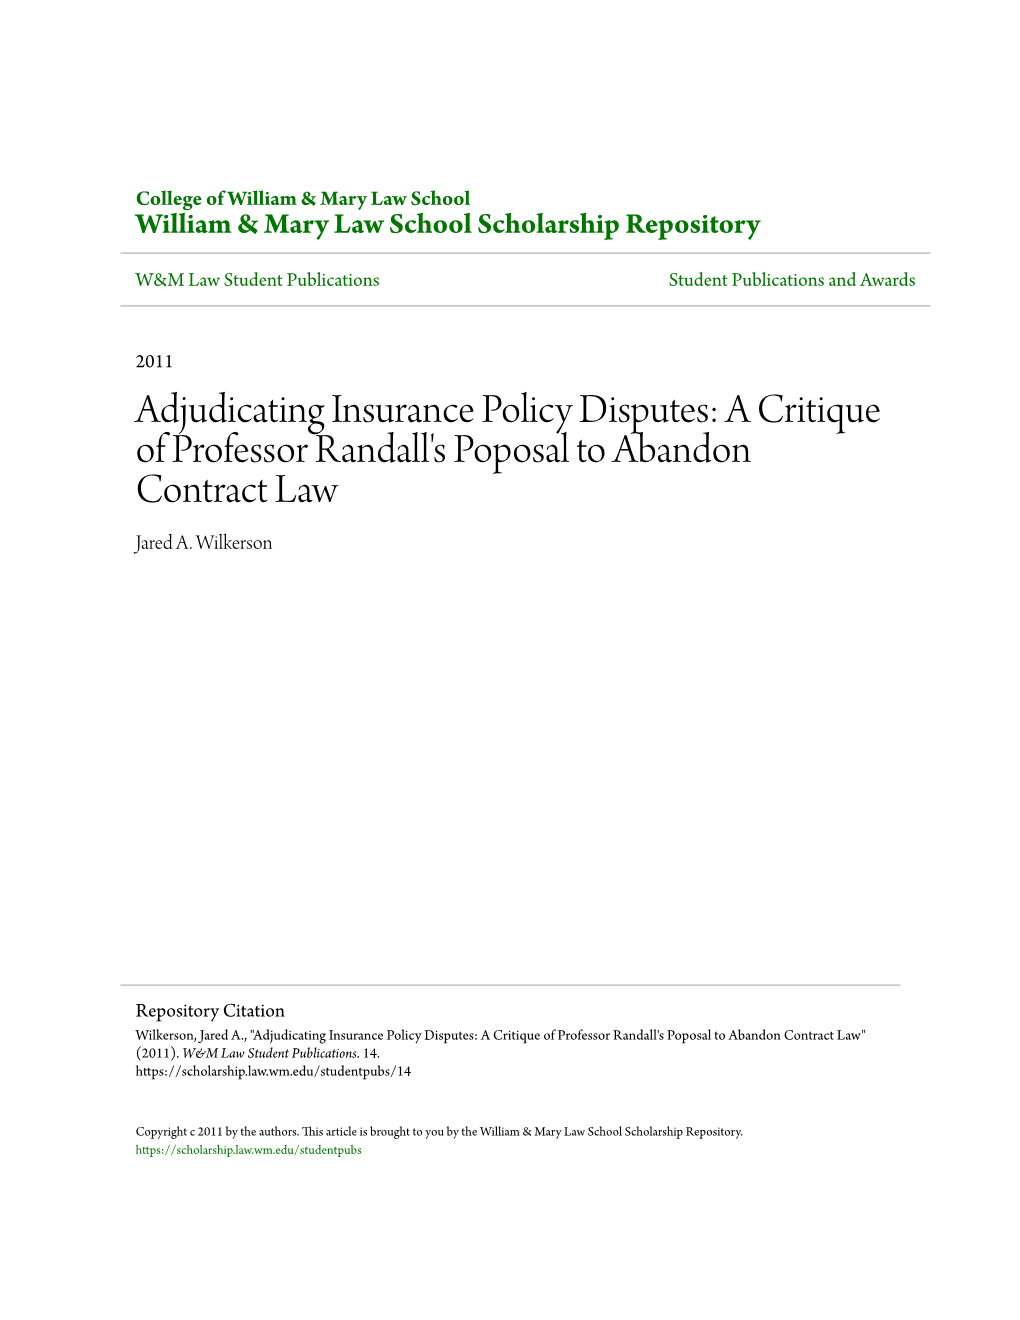 Adjudicating Insurance Policy Disputes: a Critique of Professor Randall's Poposal to Abandon Contract Law Jared A